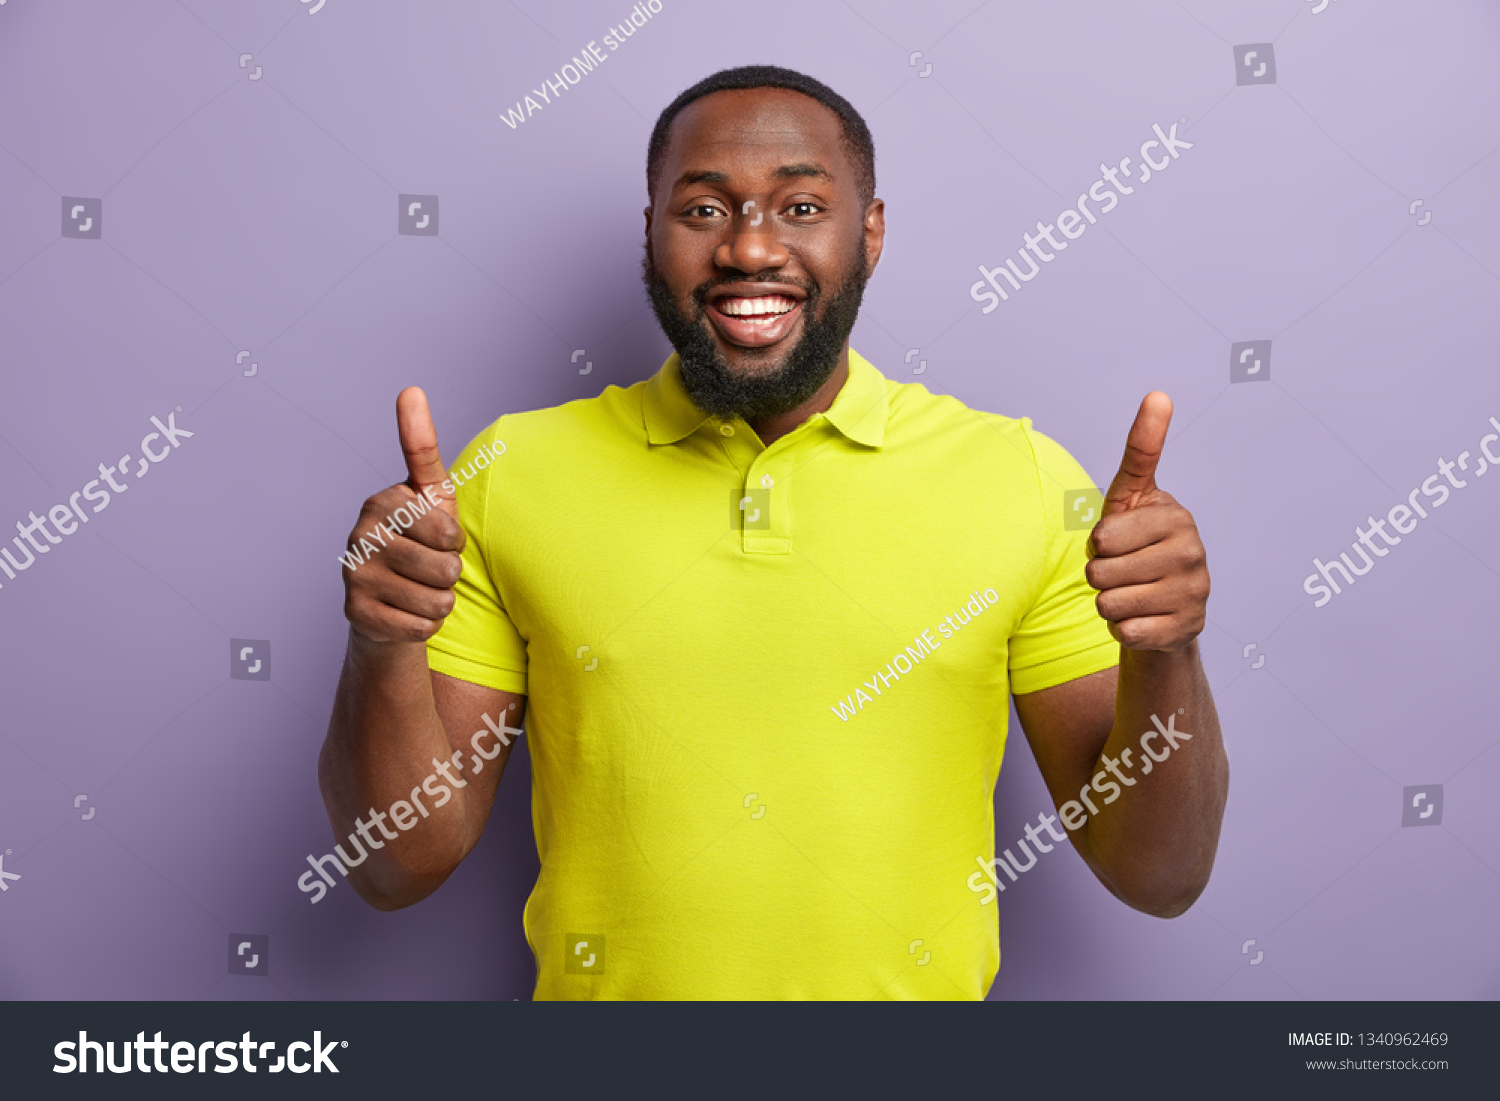 Satisfied black man gestures with both hands, shows approval gesture, keeps two thumbs raised, smiles broadly, wears yellow casual t shirt, stands against purple background. Thats nice, I like it #1340962469